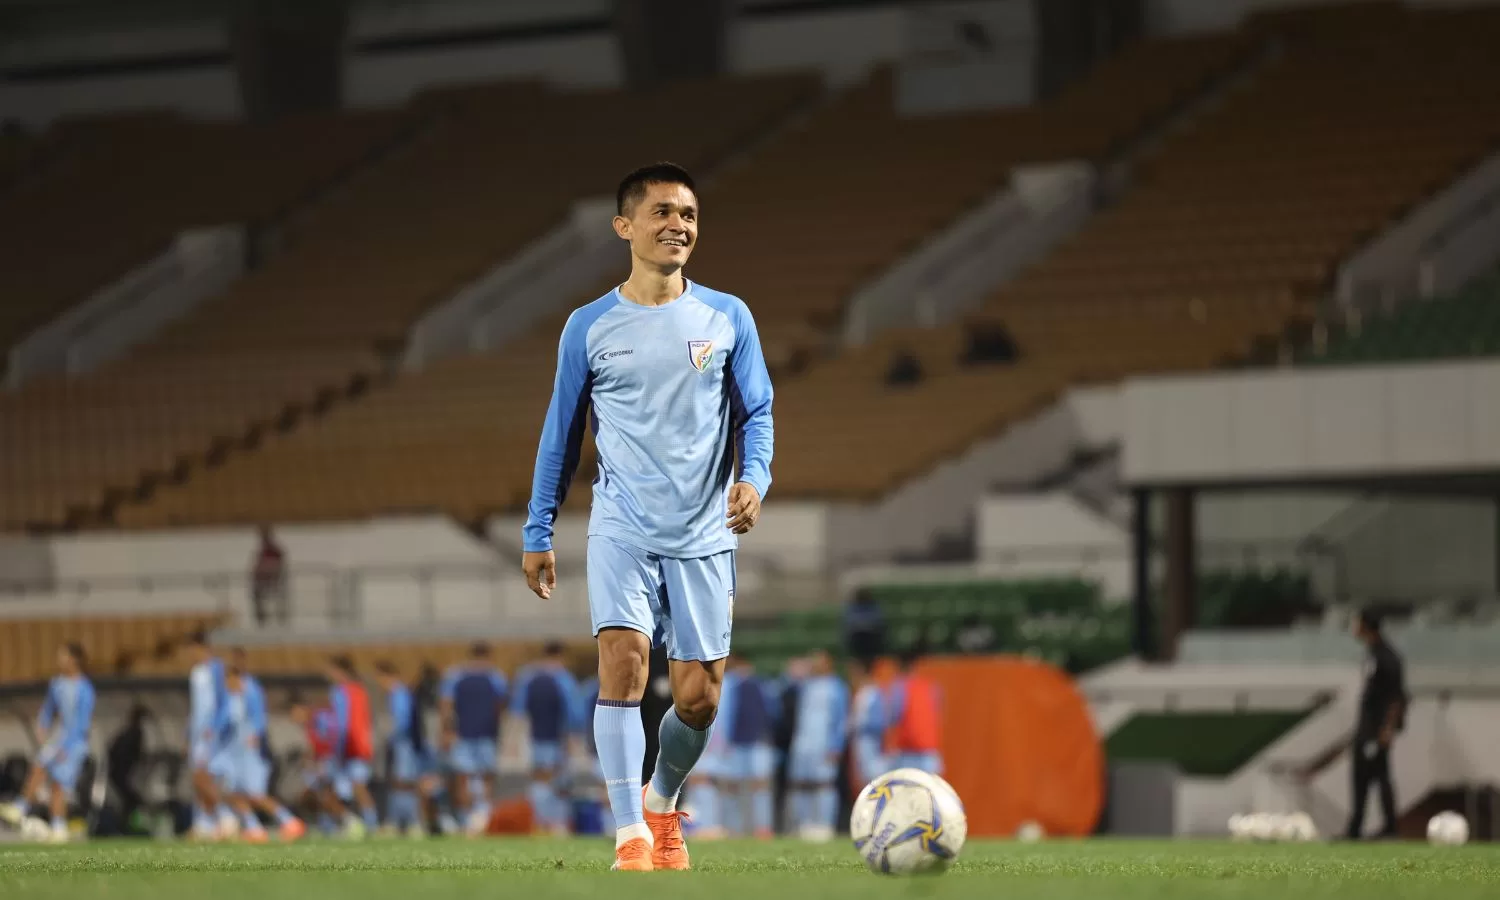 'I hope I can inspire young players to give their best', Sunil Chhetri ahead of his 150th international cap